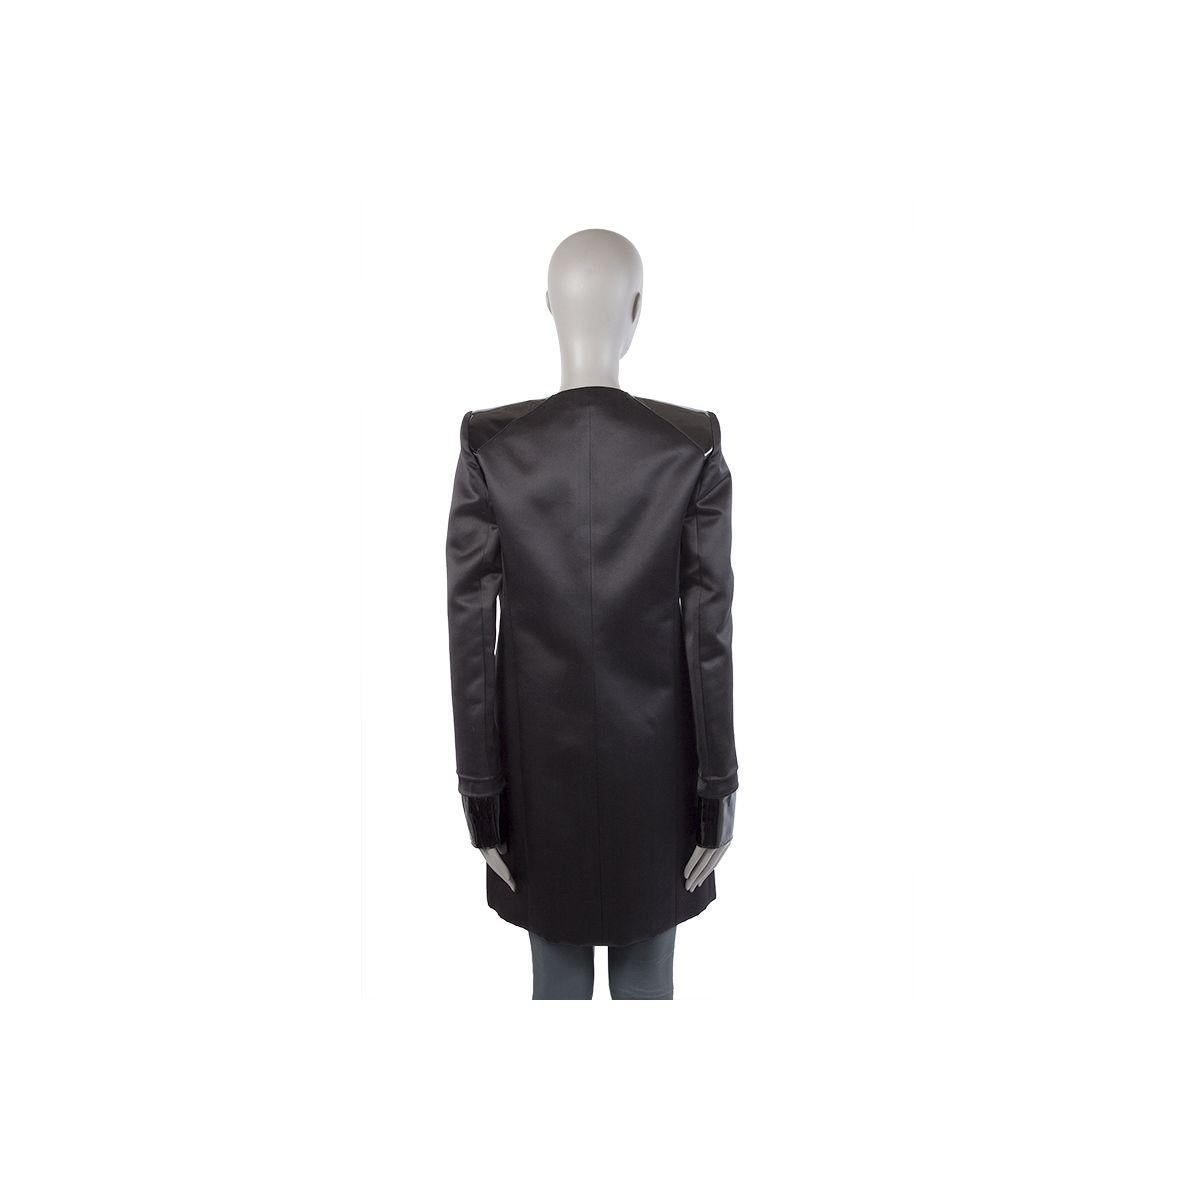 100% authentic Balenciaga long collarless open coat in black silk (100%). With two welt chest pockets, two slit pockets on the front and shoulder detail, cuffs and pocket inserts in black lambskin patent. Lined in black and off-white (silk (100%).